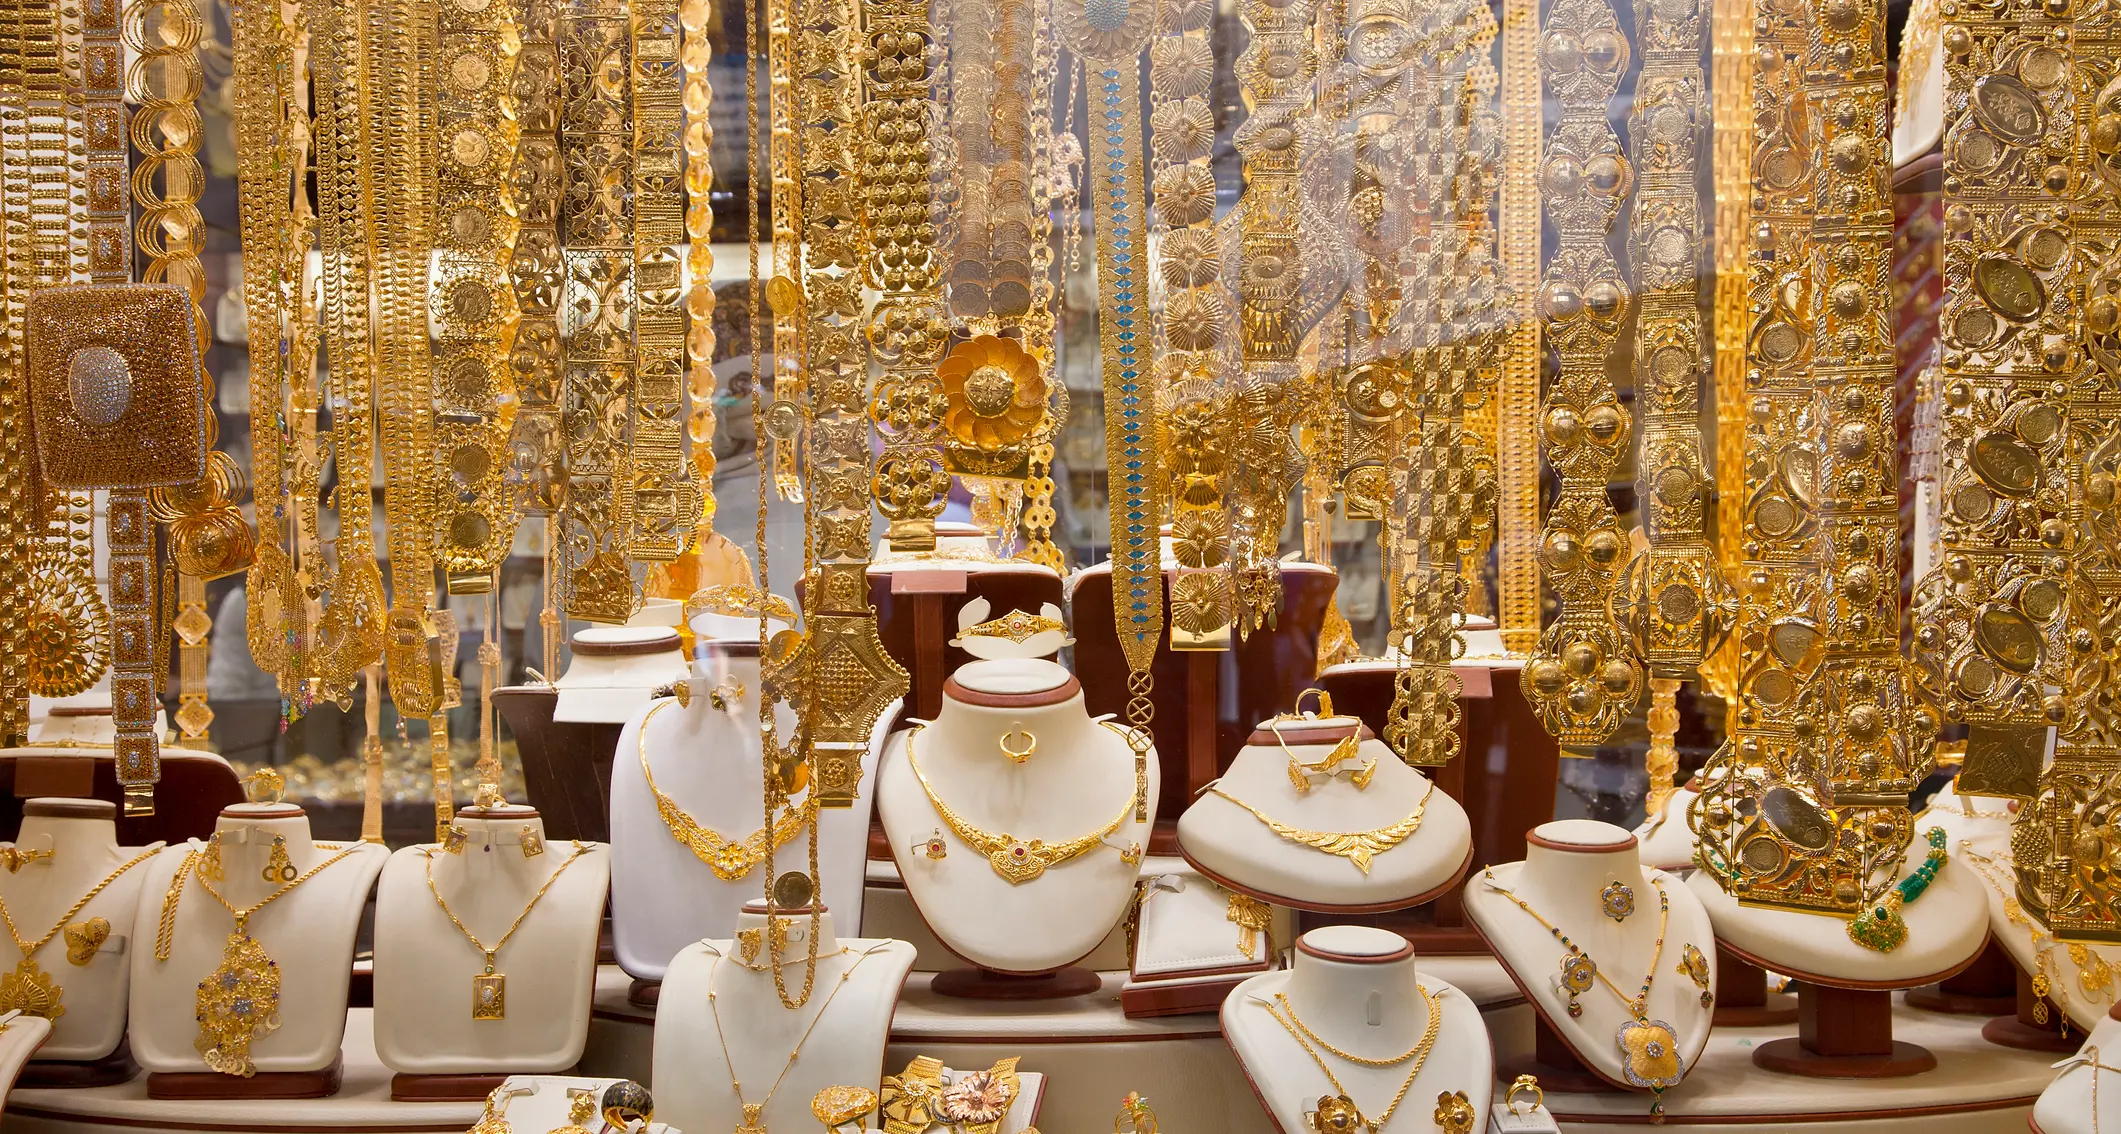 Demand for gold jewellery in the UAE decreased by 15% in 2023